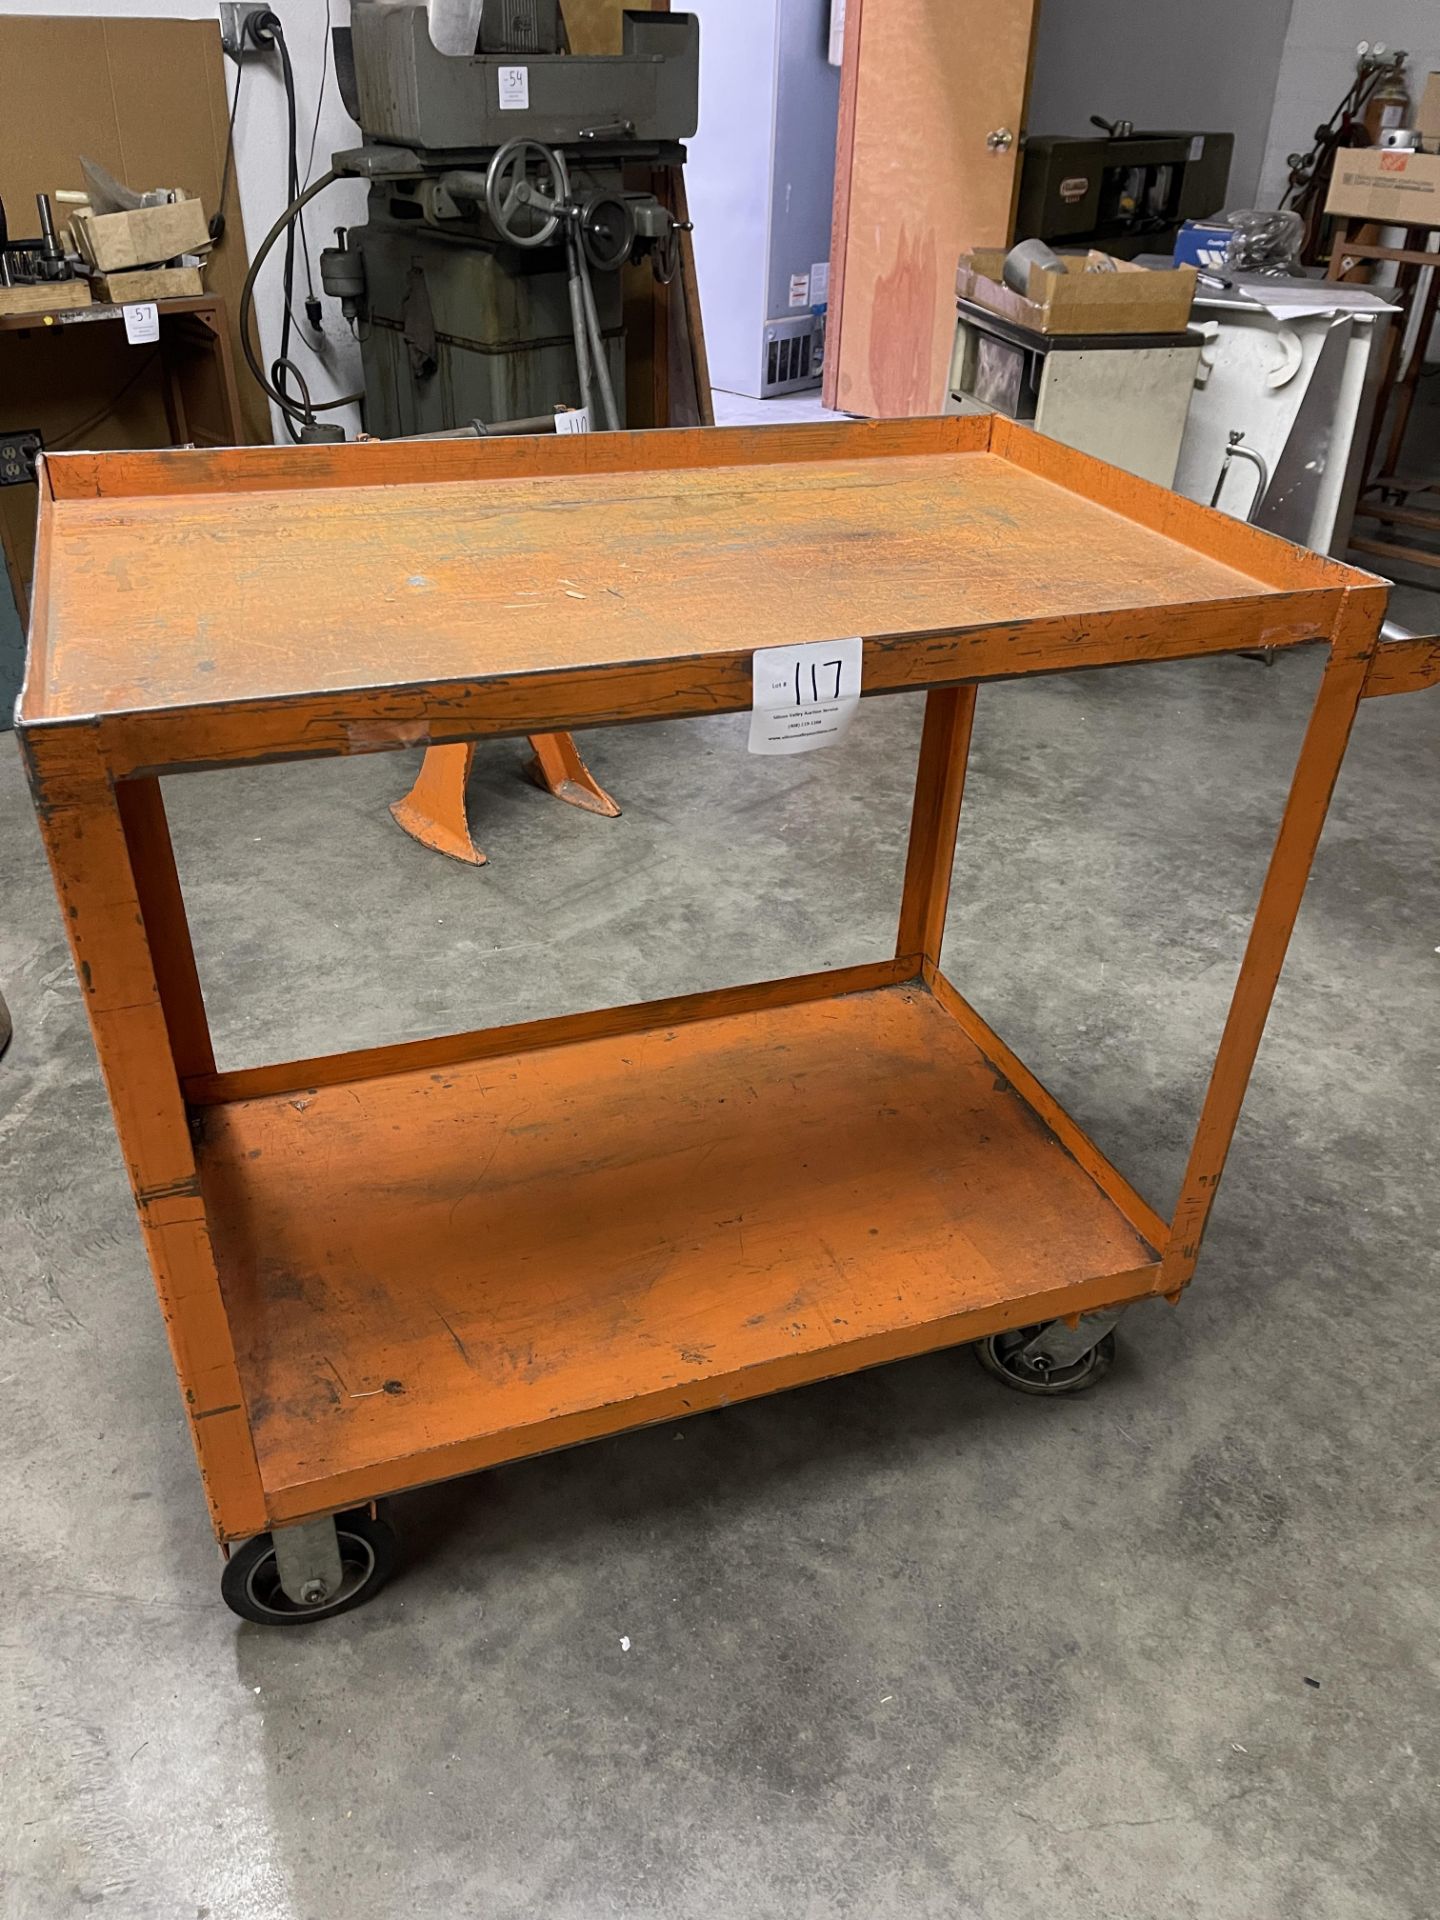 Rolling metal cart with two shelves 23-1/2" W x 36-1/2" L x 35-1/2" T